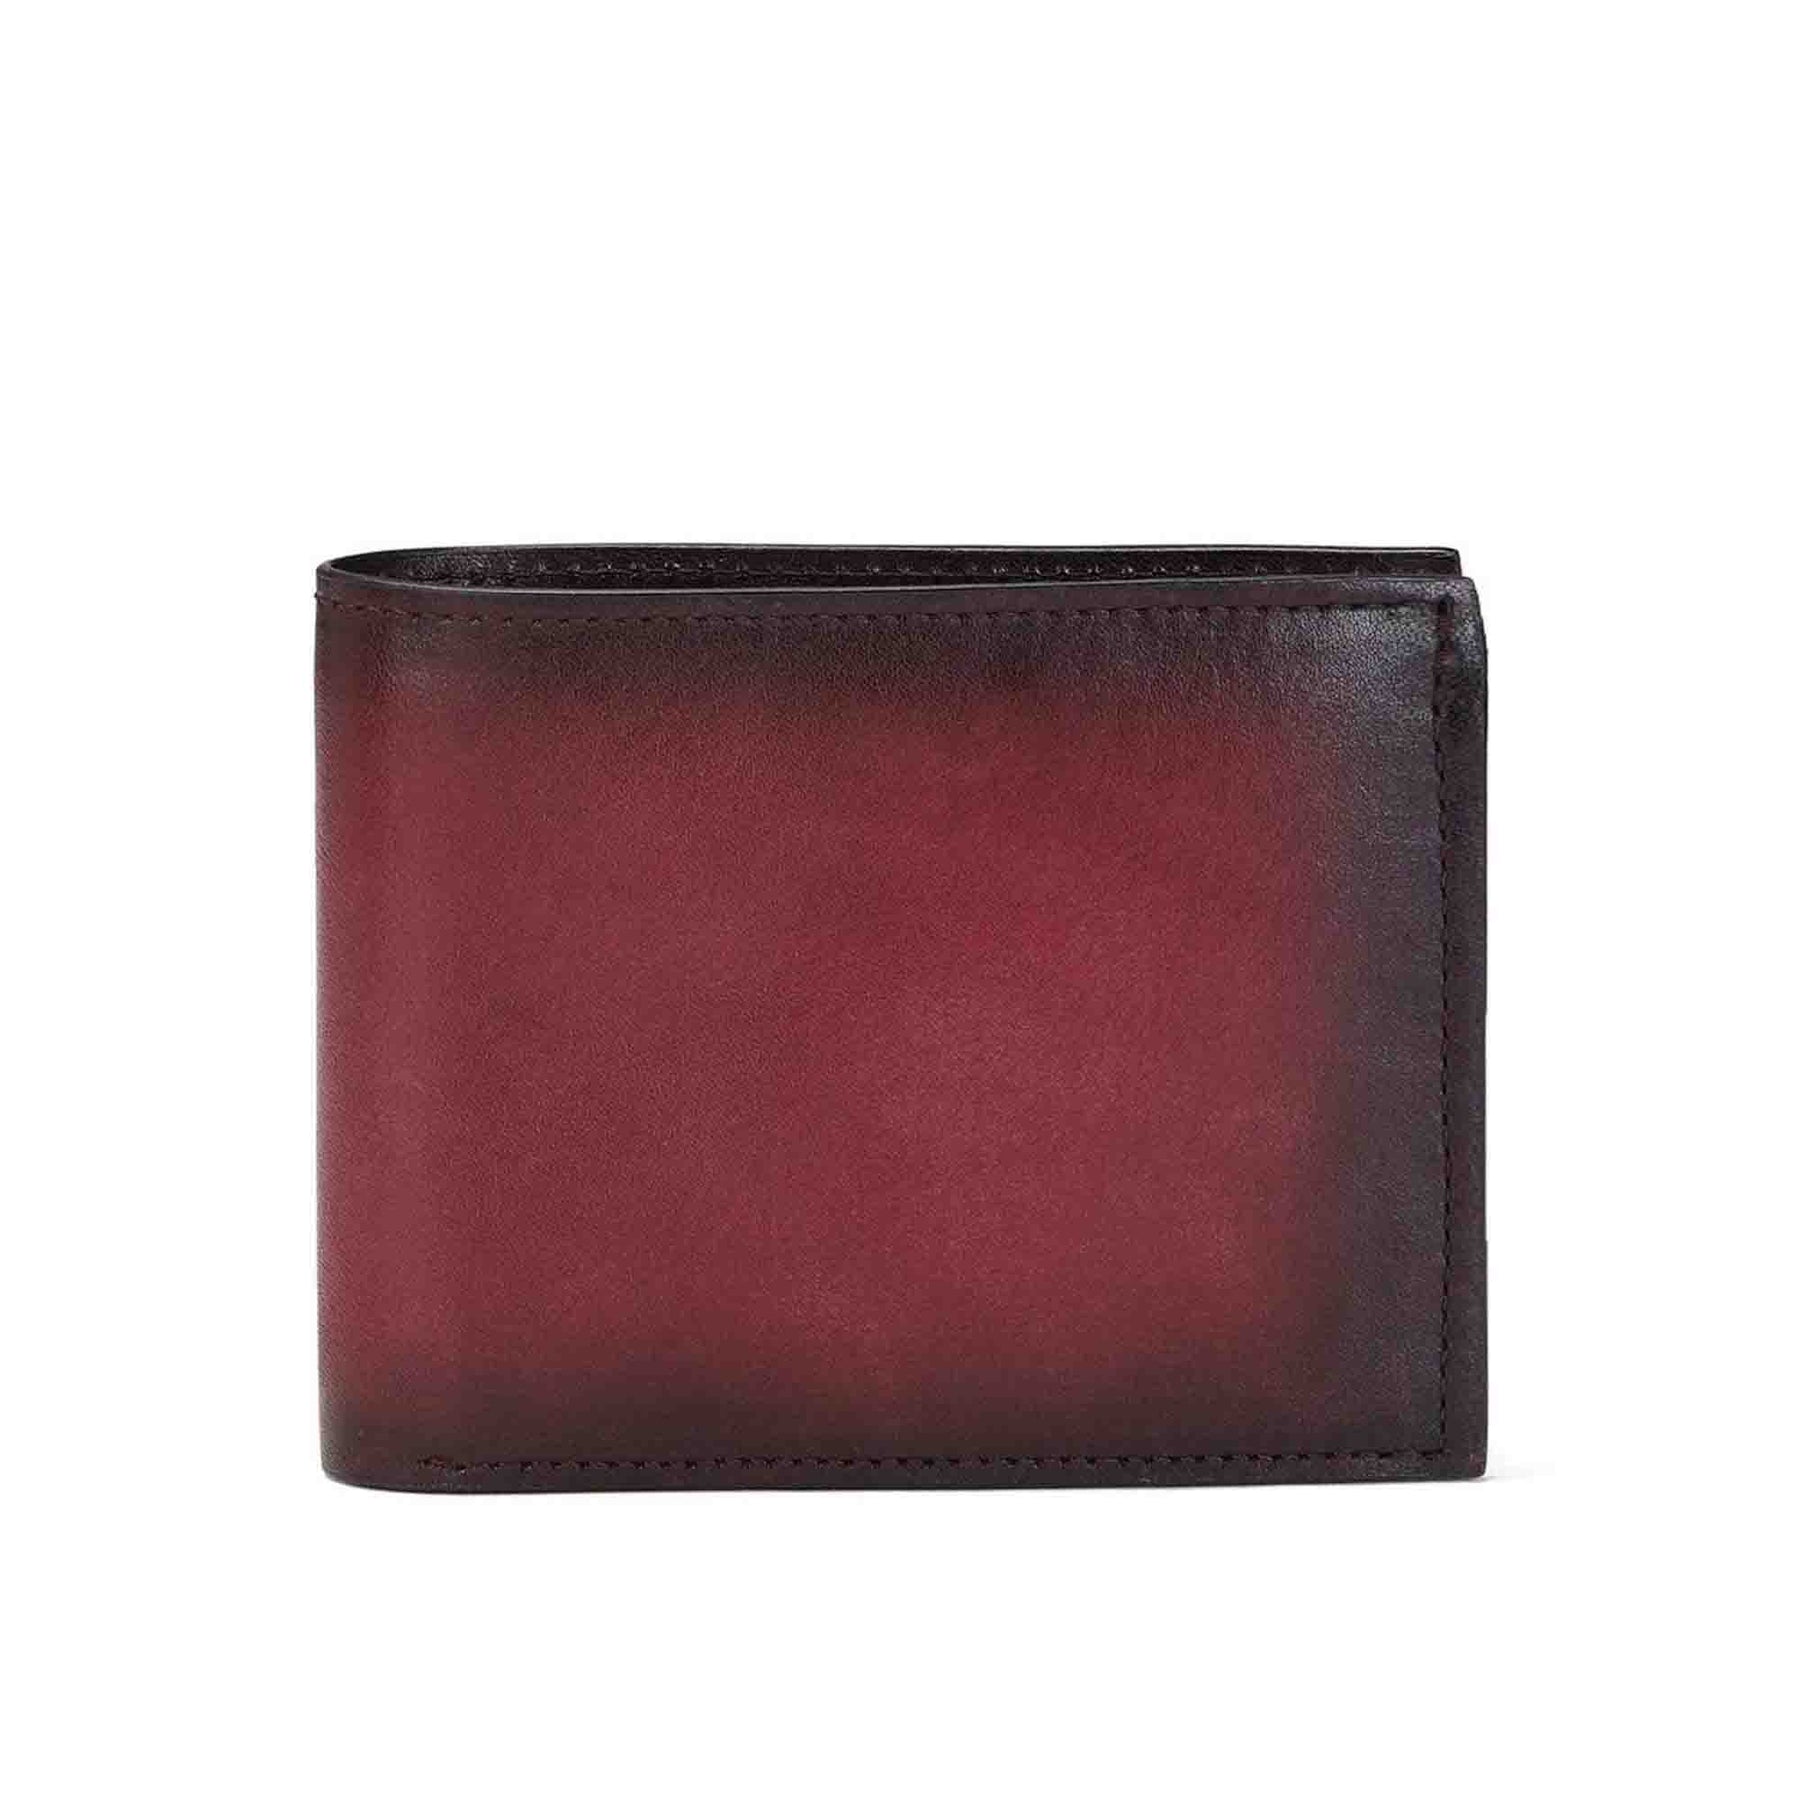 Baellerry Luxury Brand Men Wallets Long Clutch Purse Large Capacity Zippers Wallet  Male PU Leather Wallet Men Business Wallet - Price history & Review |  AliExpress Seller - PASSIONFANCY MEN BAG Store | Alitools.io